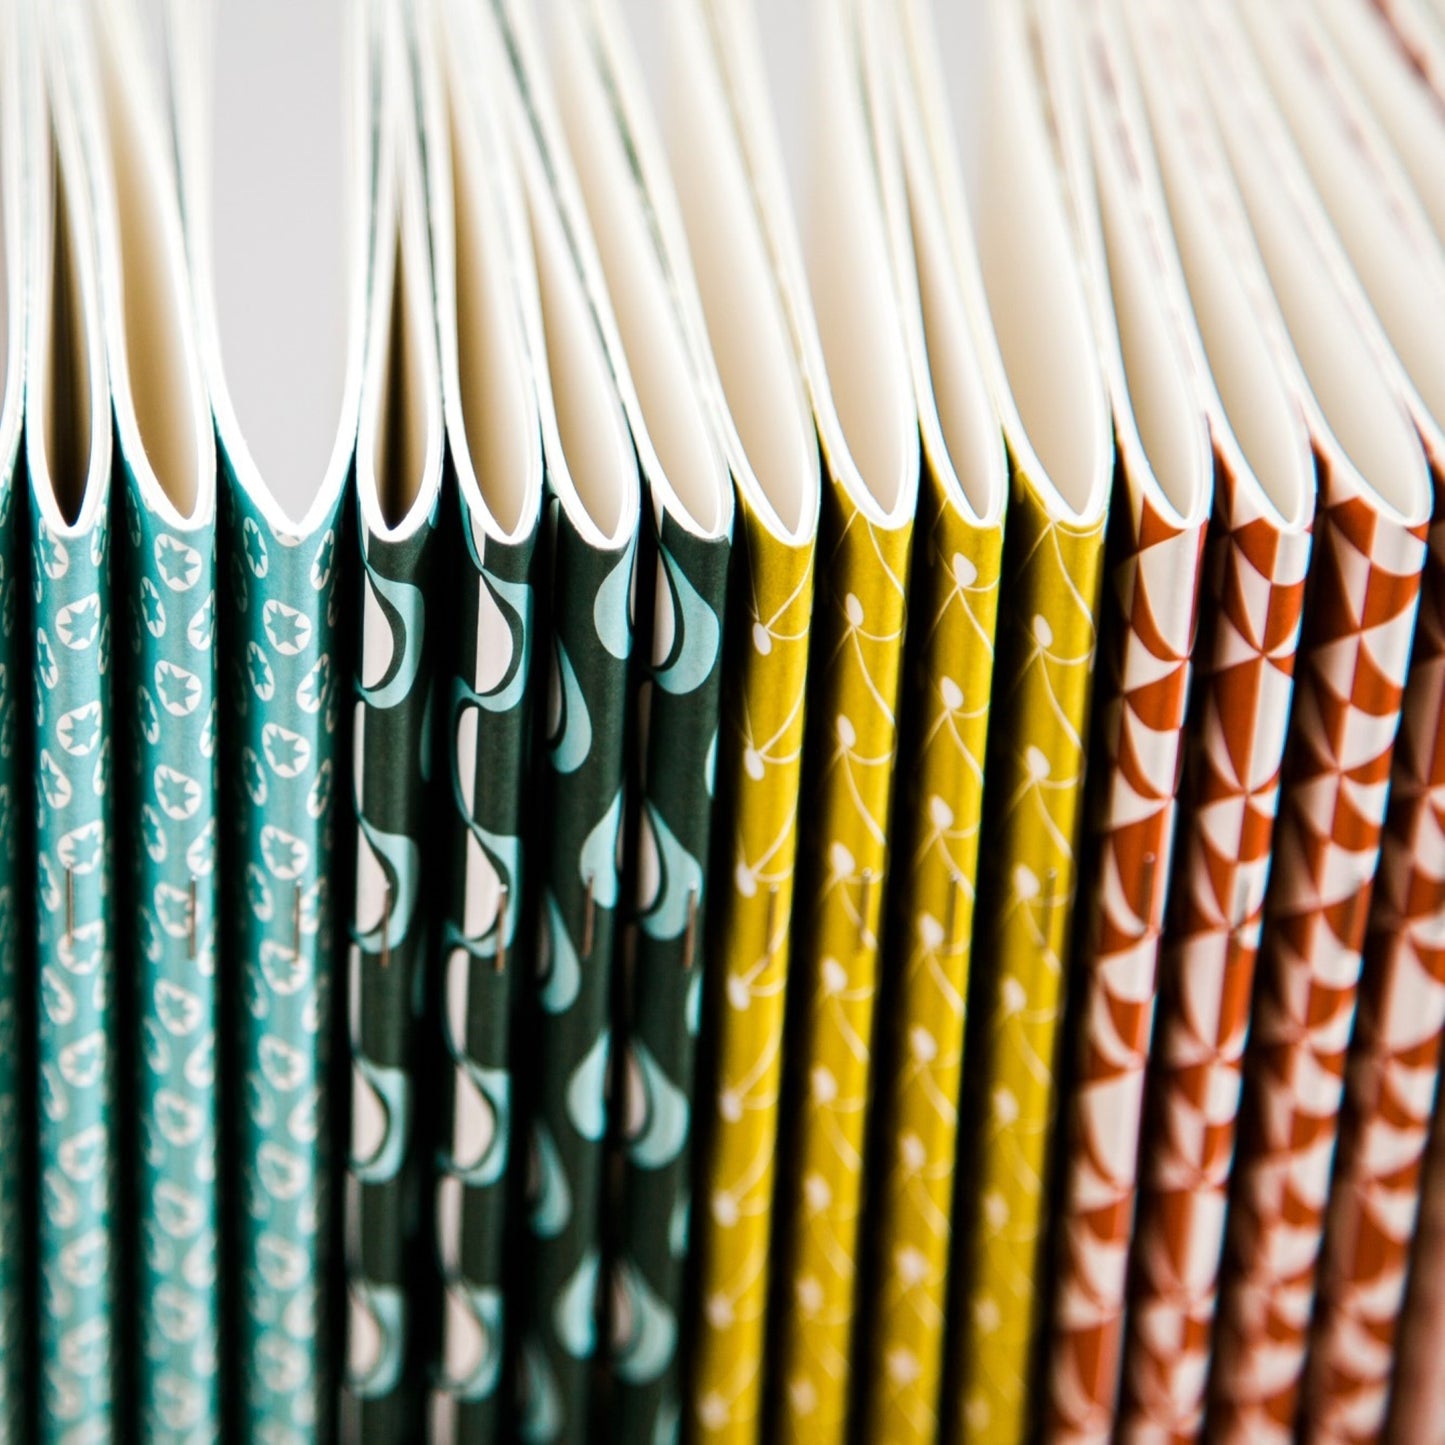 Softcover pocket notebooks by Ola Studio in a range of different patterned covers